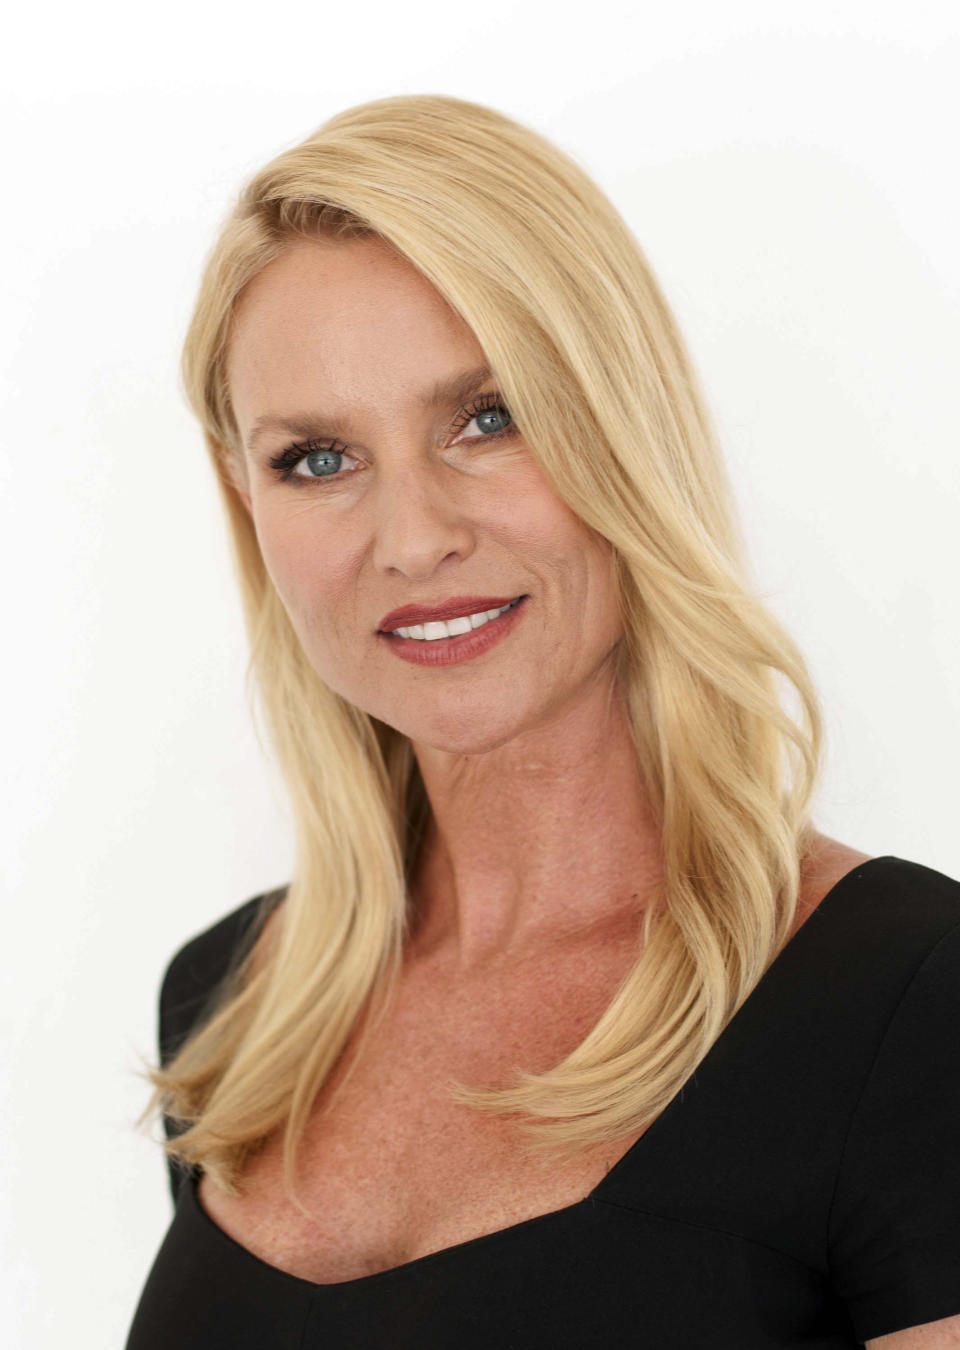 FILE - In this July 27, 2011 file photo, actress Nicollette Sheridan poses for a portrait at during The Television Critics Association 2011 Summer Press Tour in Beverly Hills, Calif. An appeals court in Los Angeles ruled Thursday August 16, 2012 that Sheridan is not entitled to a new trial on her claim that she was wrongfully fired from the series “Desperate Housewives,” but that she should be allowed to pursue a claim she was retaliated against for complaining about an unsafe work condition. (AP Photo/Dan Steinberg, File)